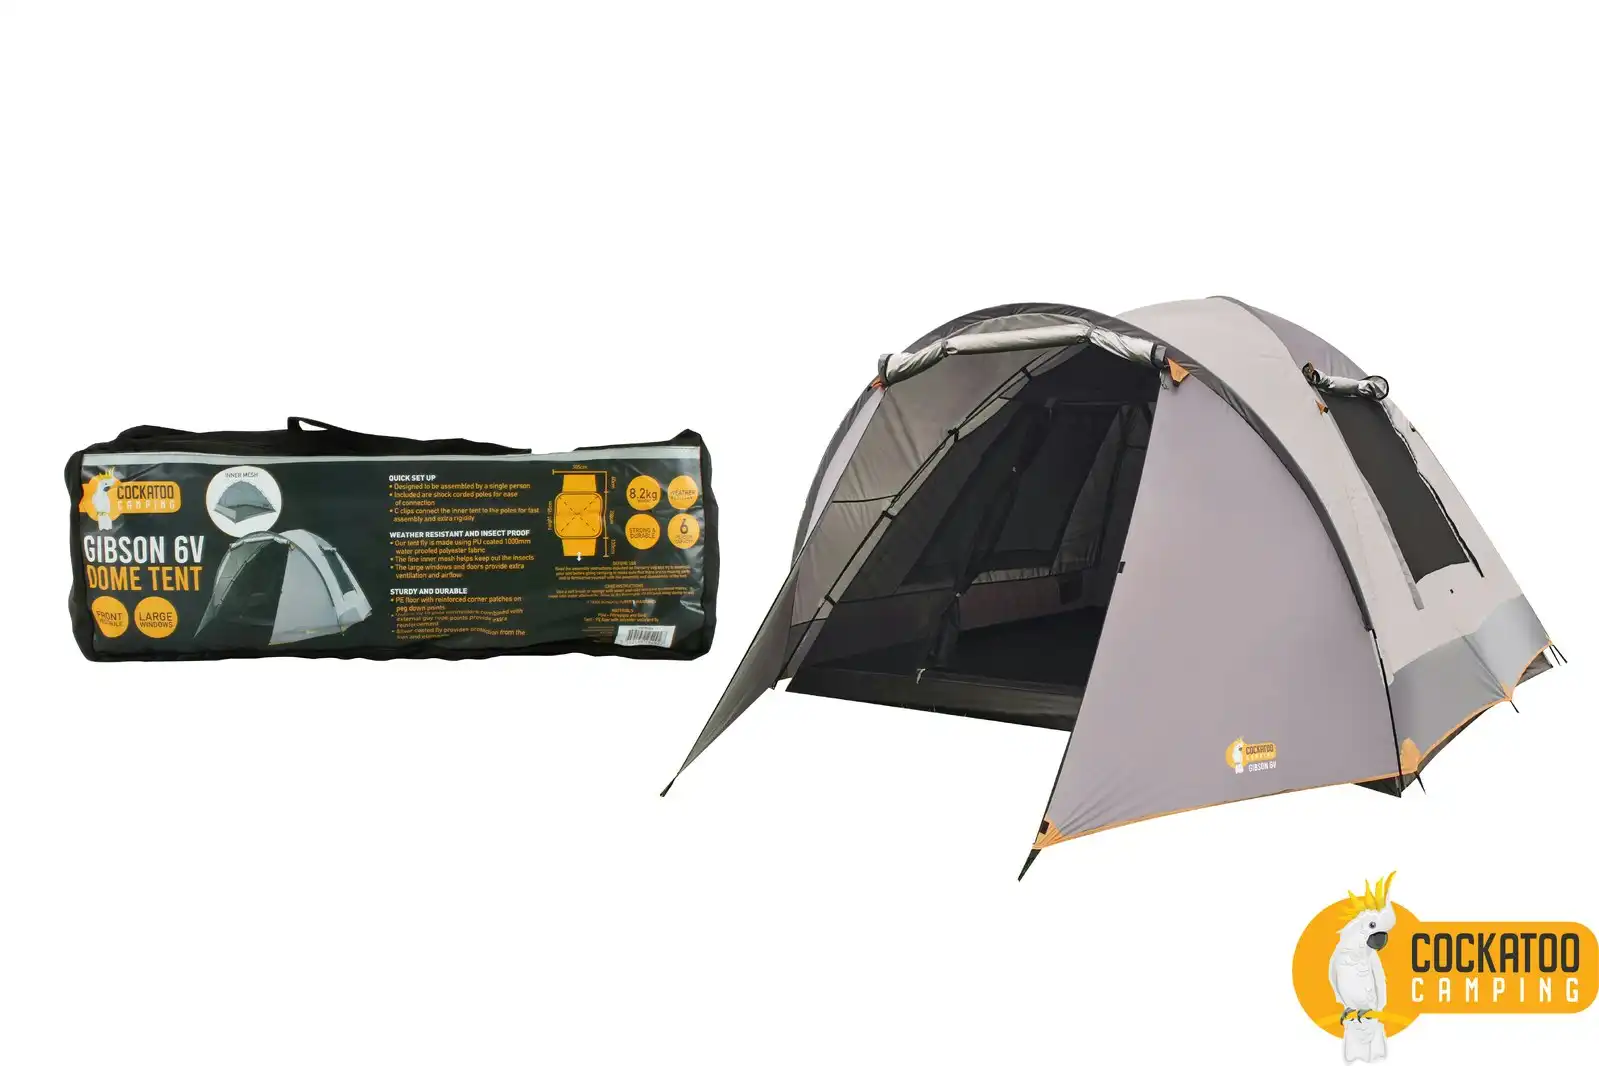 Cockatoo Camping Gibson 6V Dome Tent Waterproof Outdoor Hiking Shelter Grey